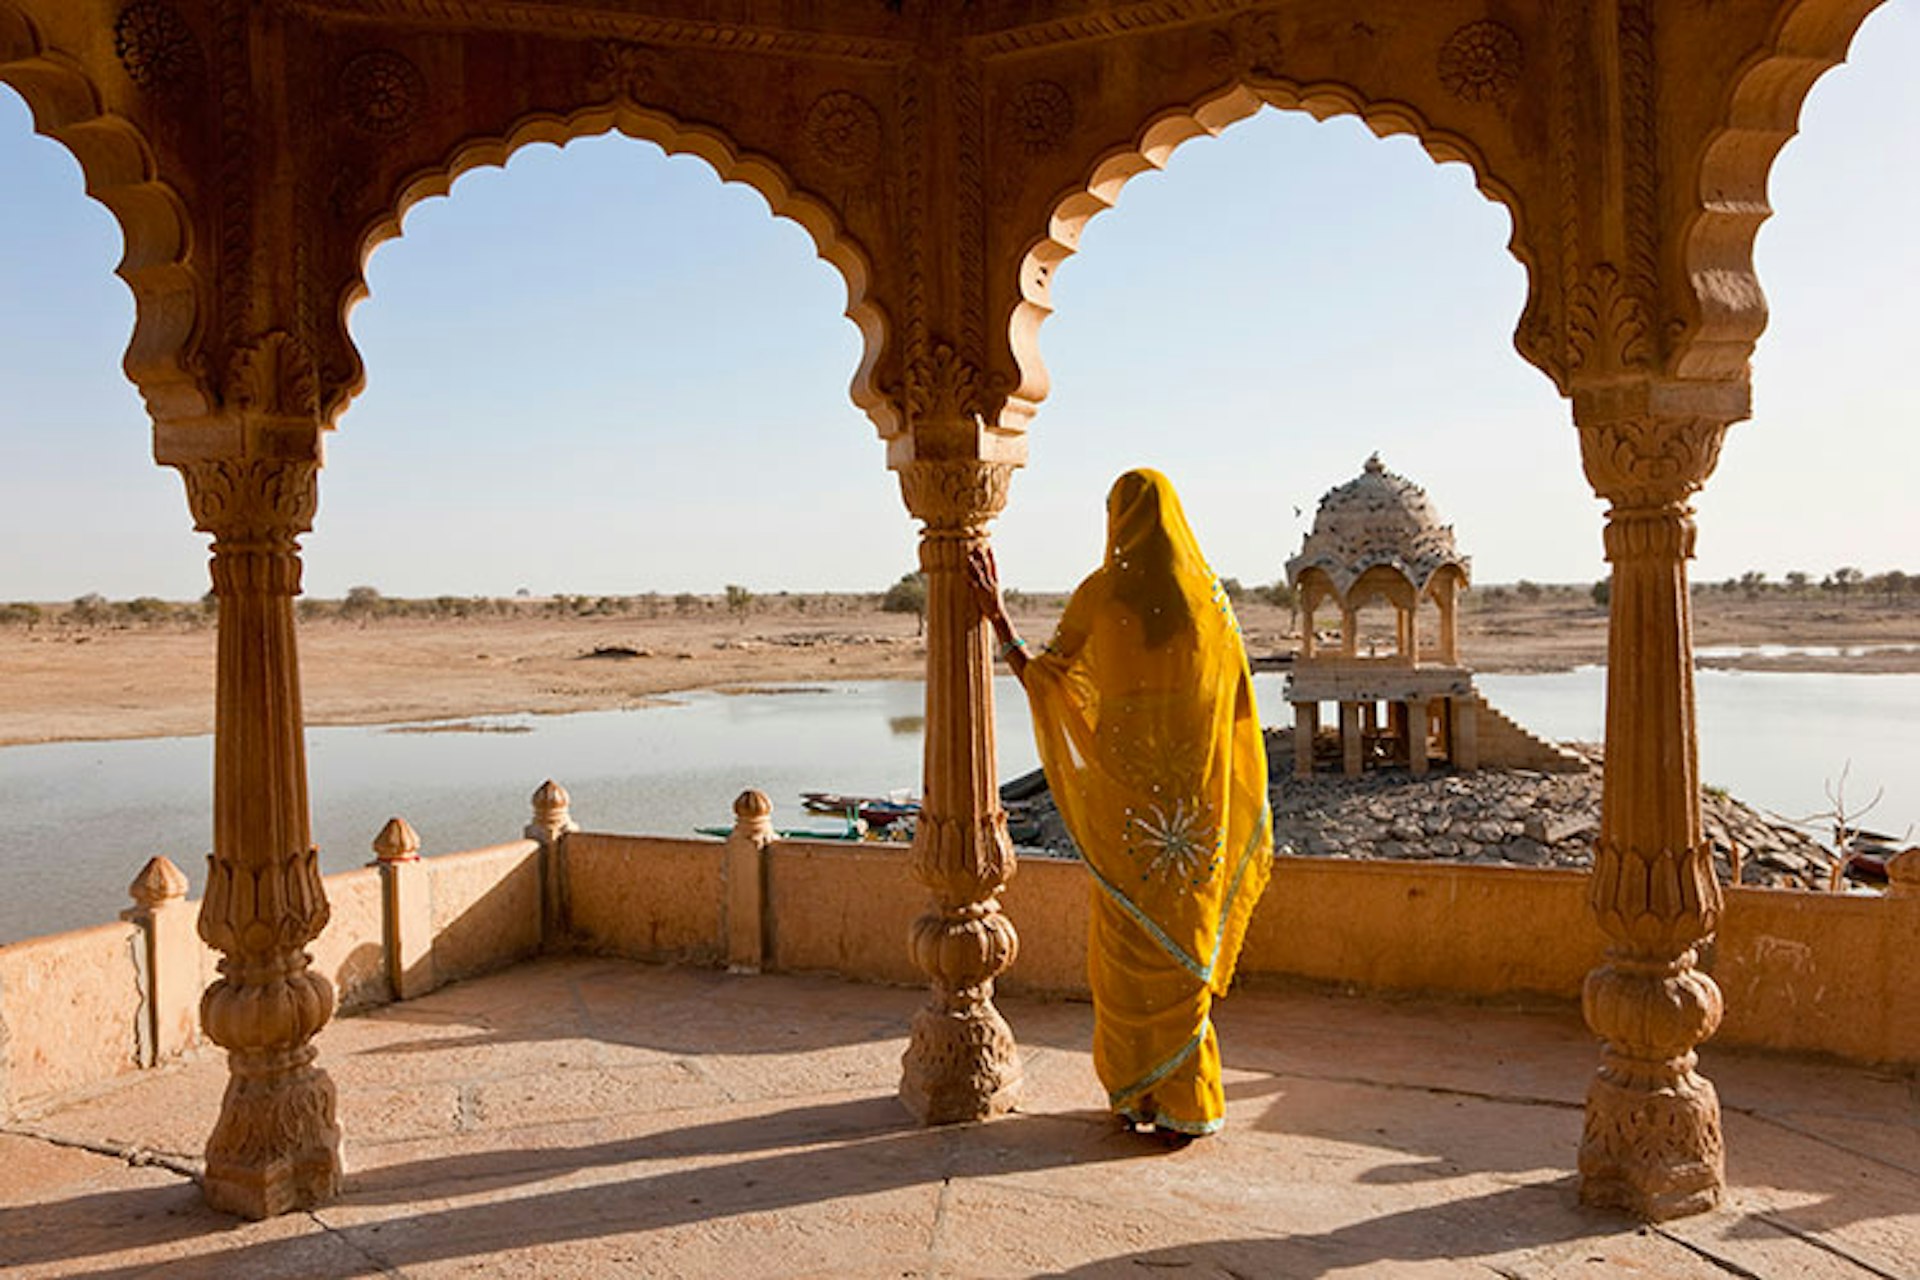 Why not jilt your lover in style on the banks of Lake Gadisar, Jaisalmer? Image by Peter Adams / The Image Bank / Getty Images.